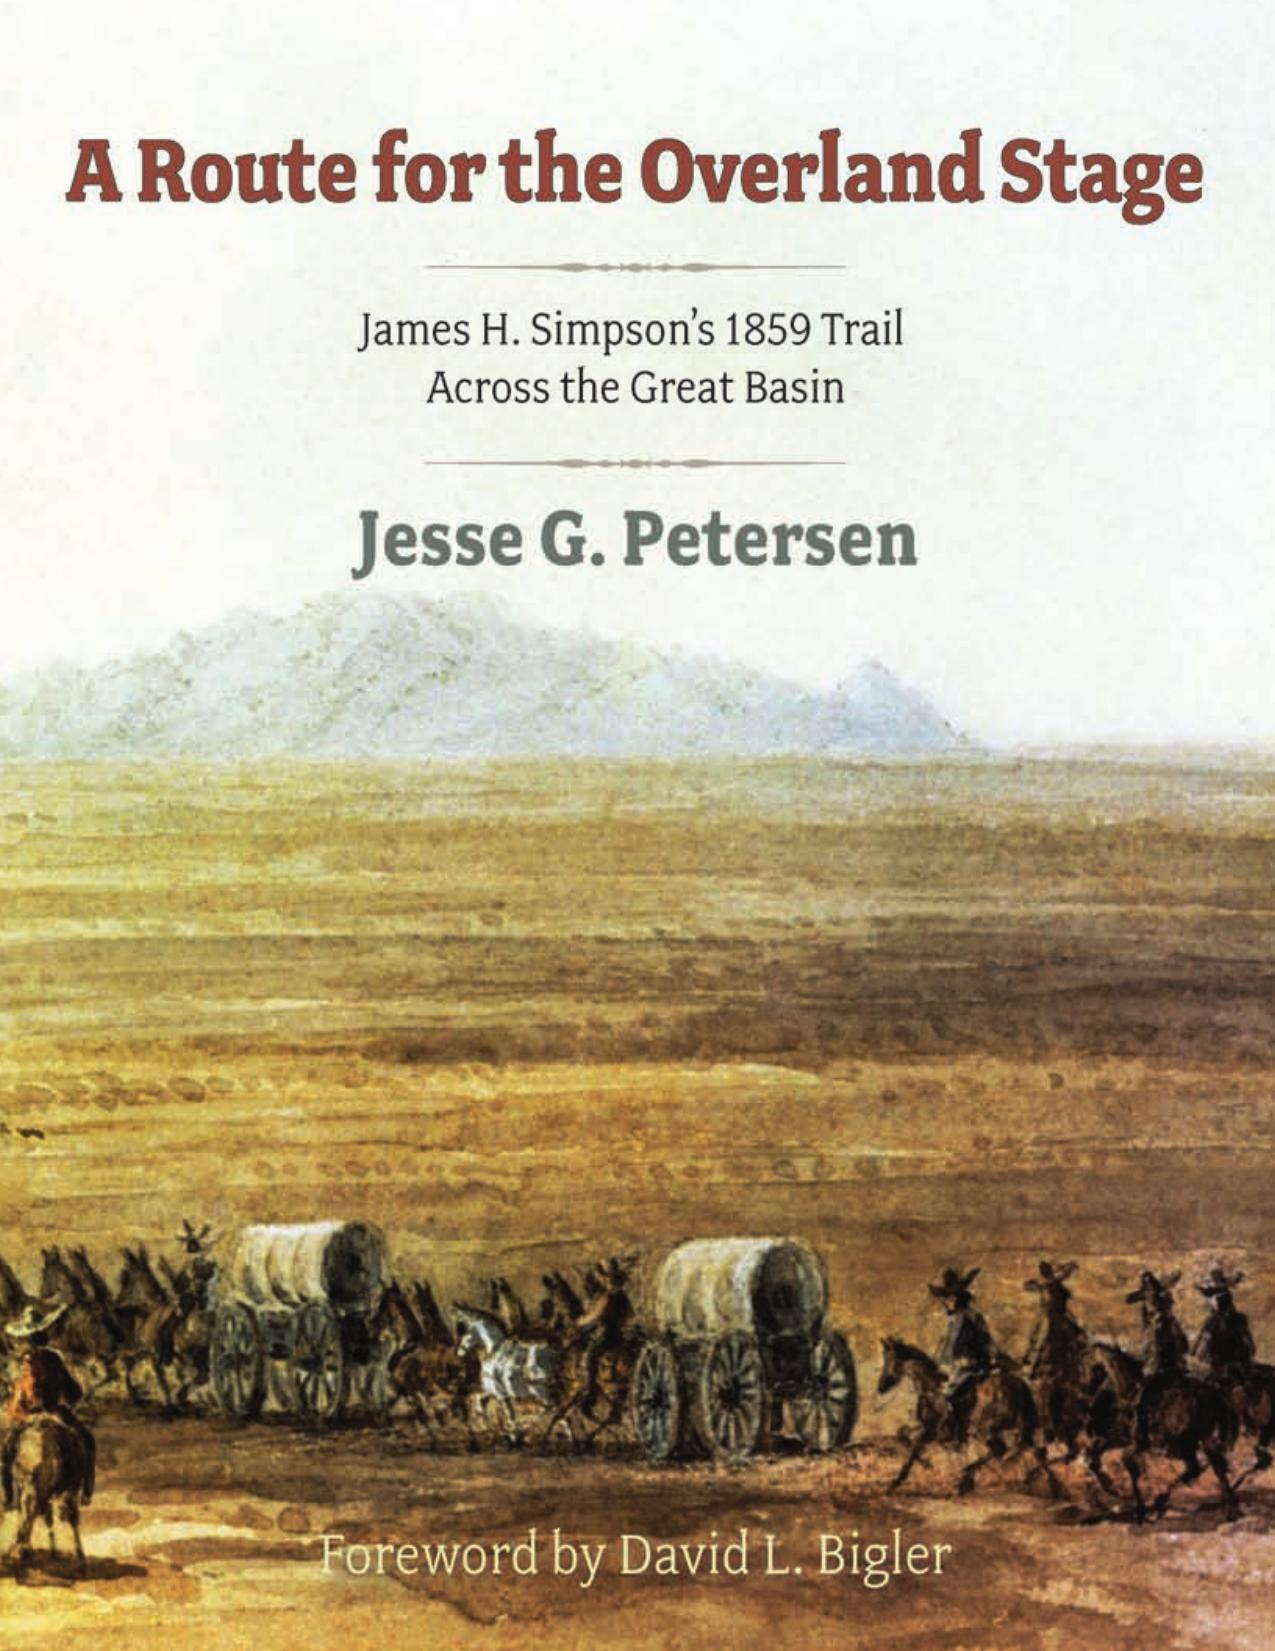 Route for the Overland Stage: James H. Simpson's 1859 Trail Across the Great Basin by Jesse G. Petersen